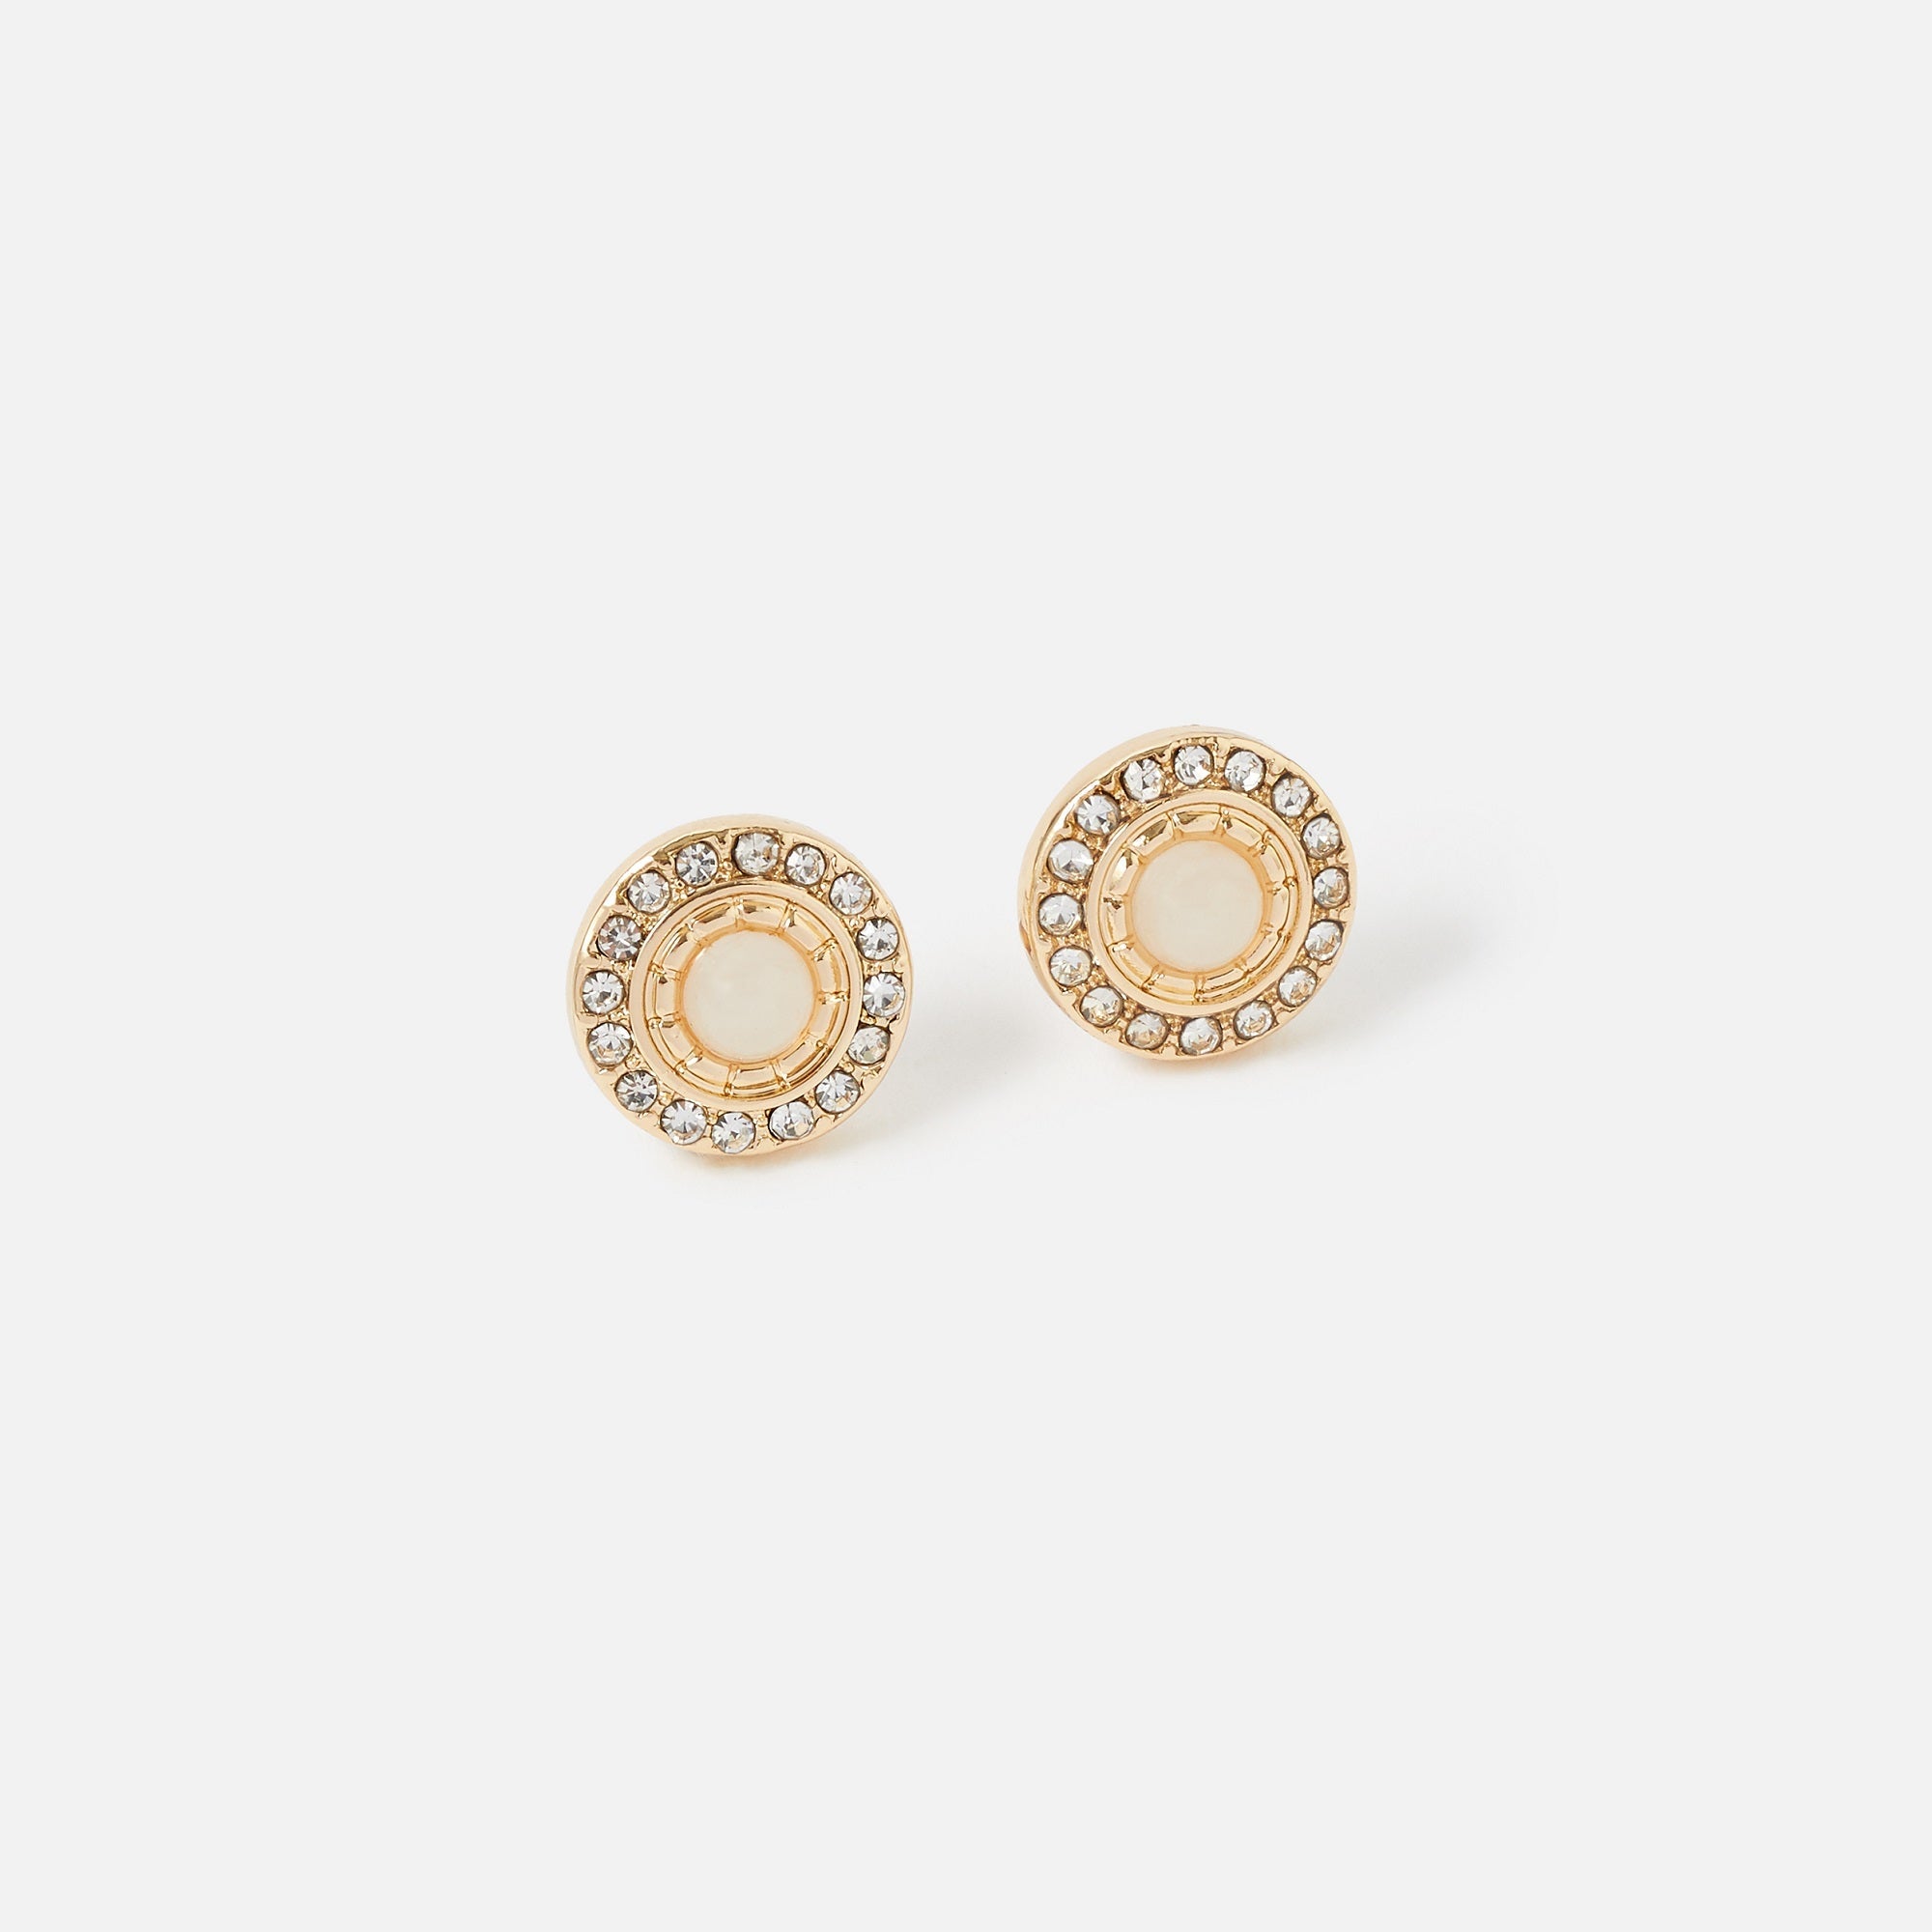 Accessorize London Women's Gold Stone Pave Stud Earring